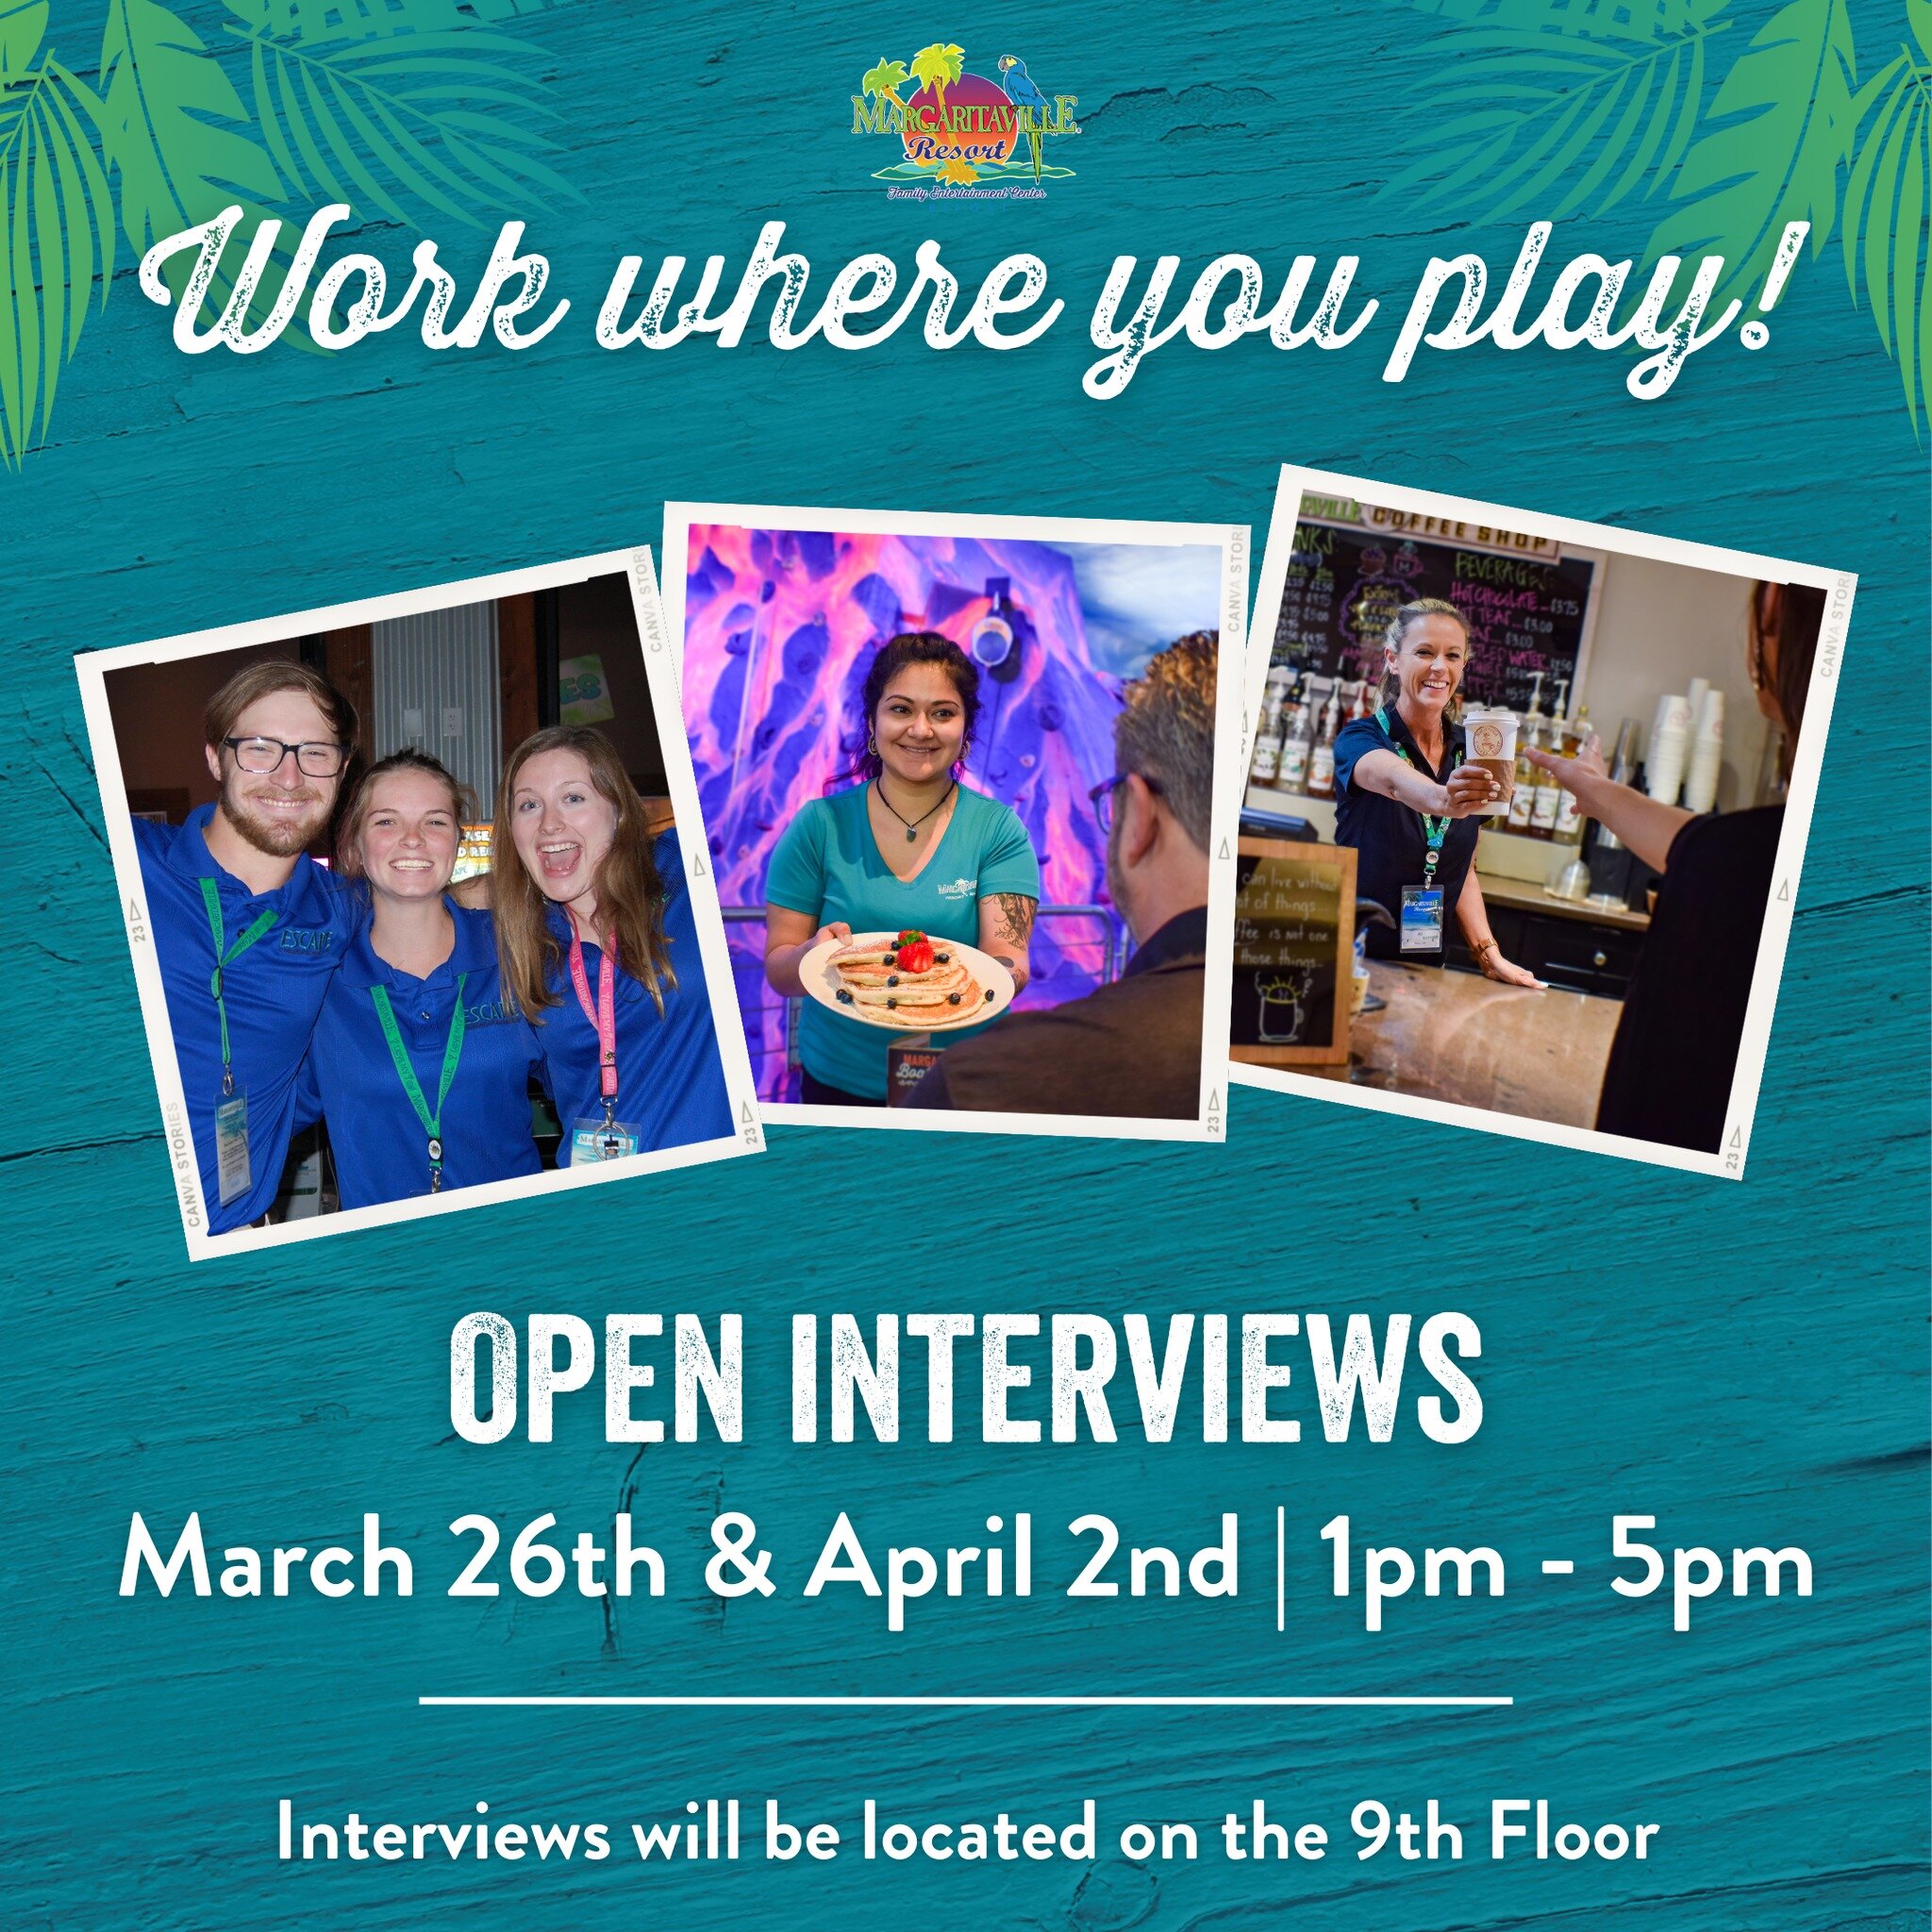 Your Next Chapter Awaits at Margaritaville Resort Biloxi! 🌴 Join us for open interviews TODAY!
Bring your A-game and dress to reflect the awesome individual you are! 
margaritavilleresortbiloxi.com/careers